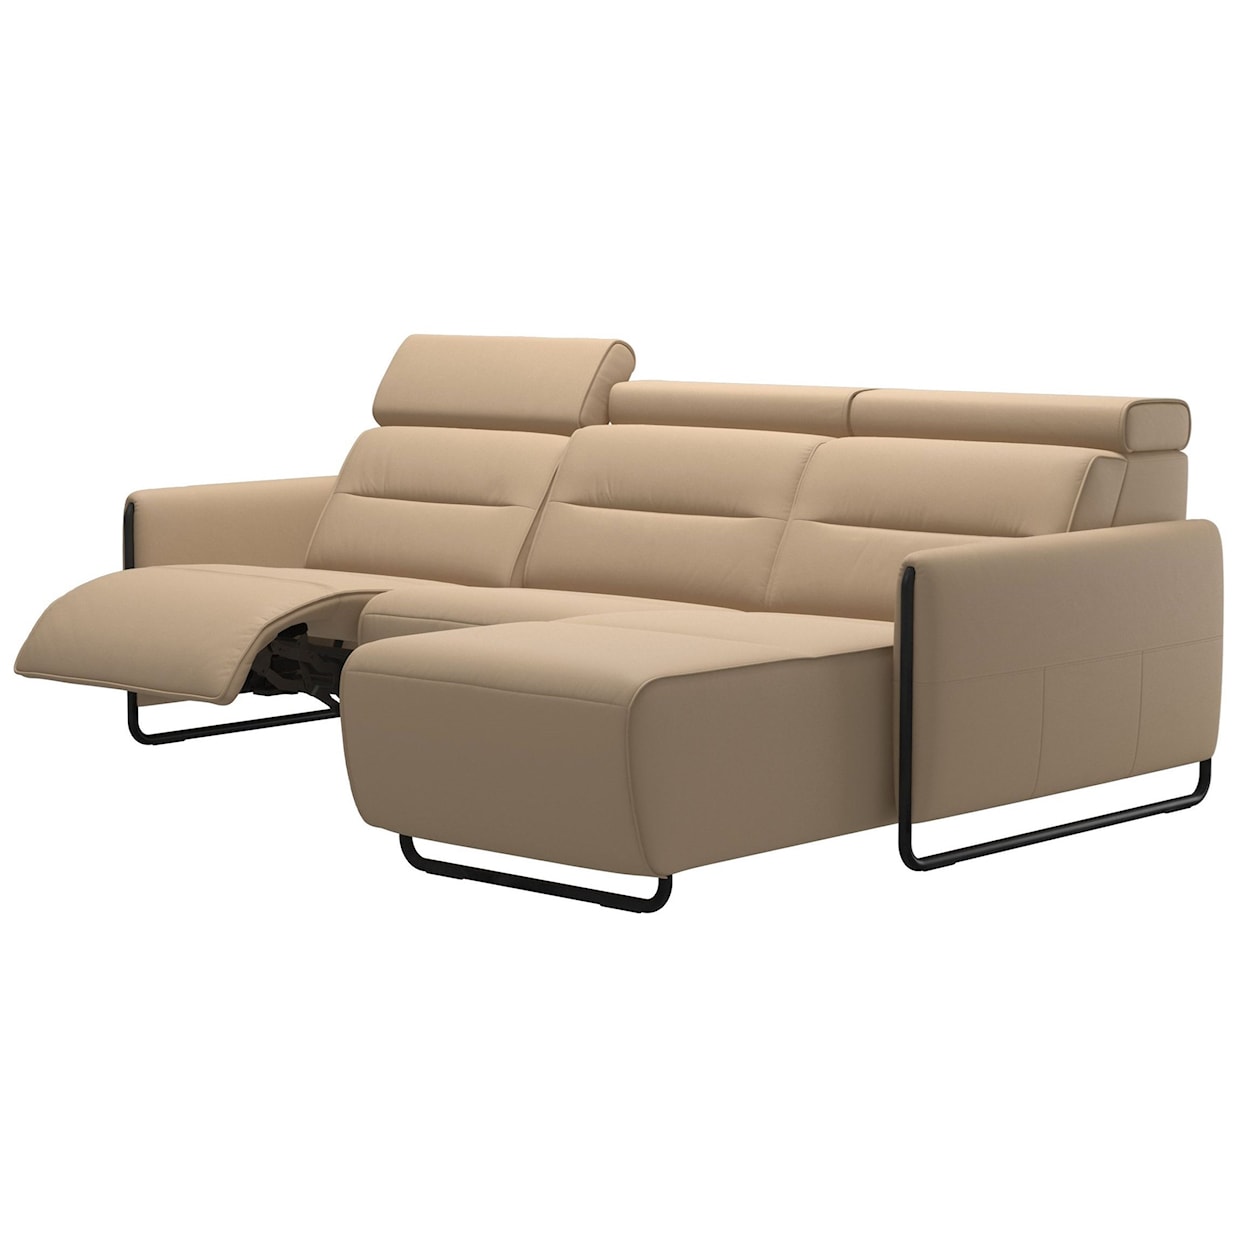 Stressless by Ekornes Emily Power 2-Seat Sectional with Longseat